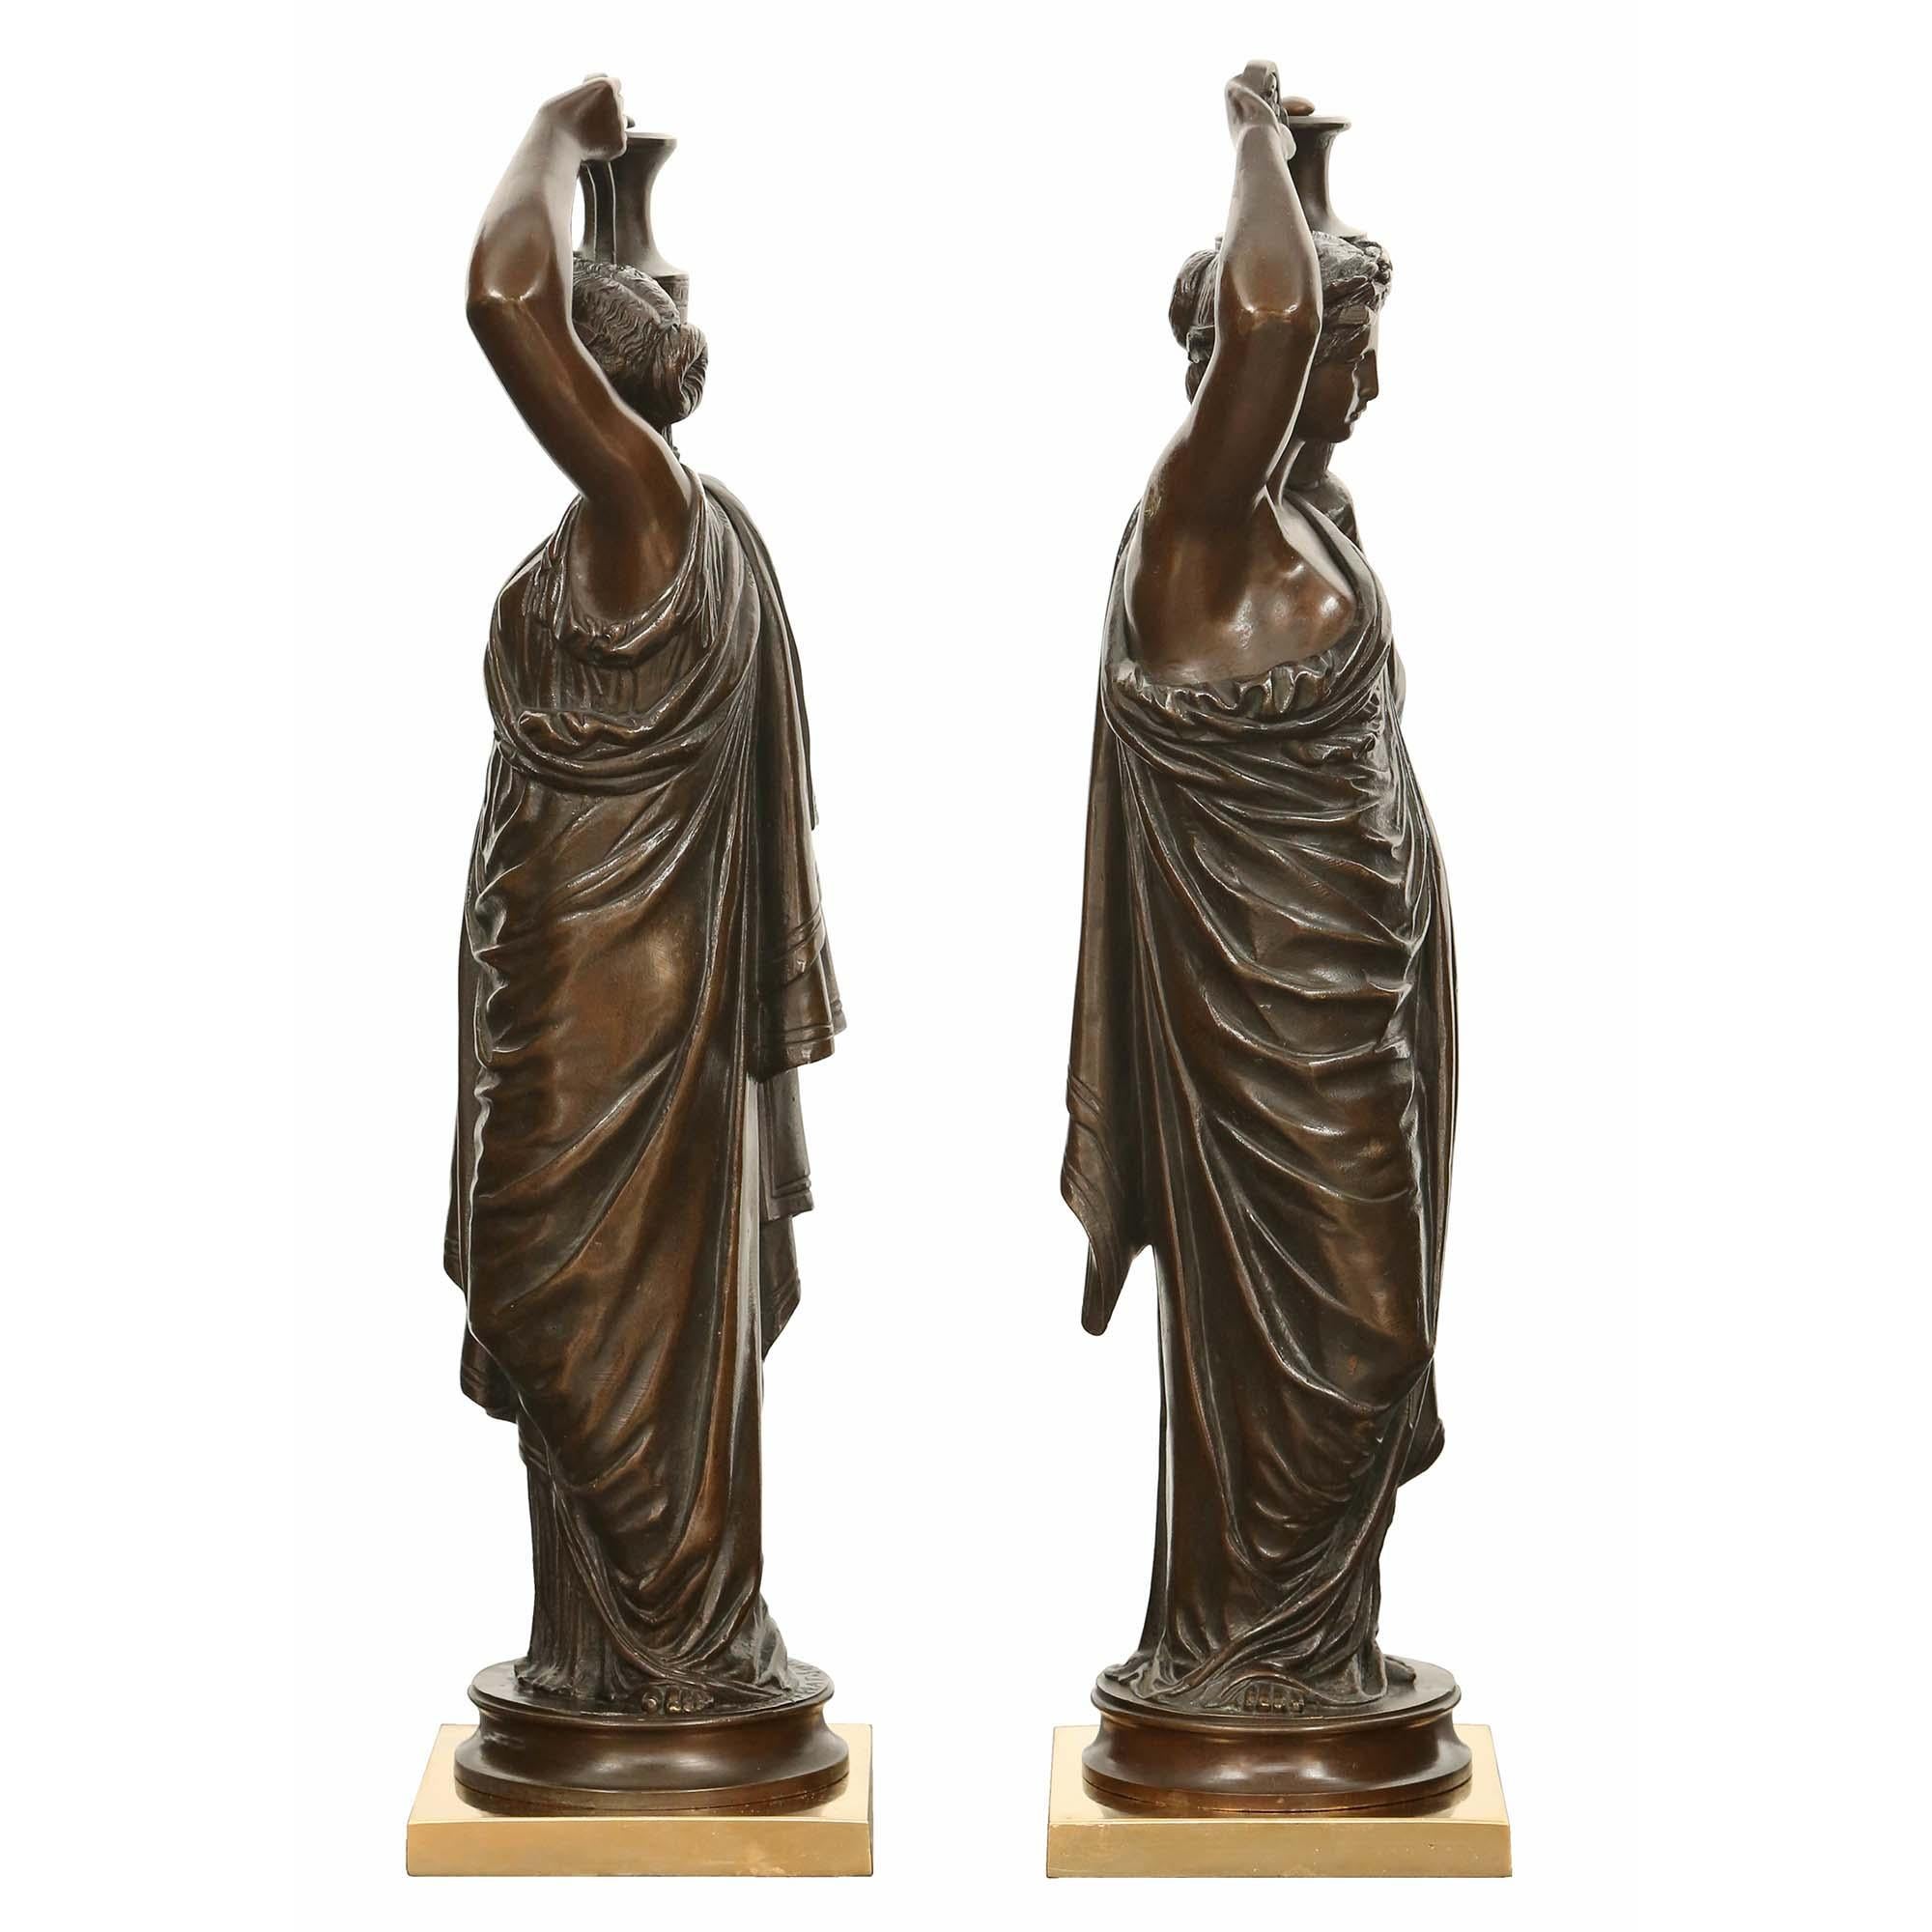 A charming true pair of French 19th century patinated bronze statues signed H. Ferrat. Each bronze is raised by a square ormolu base and with a circular patinated bronze pedestal. The bronzes depict female maidens draped in classical attire carrying